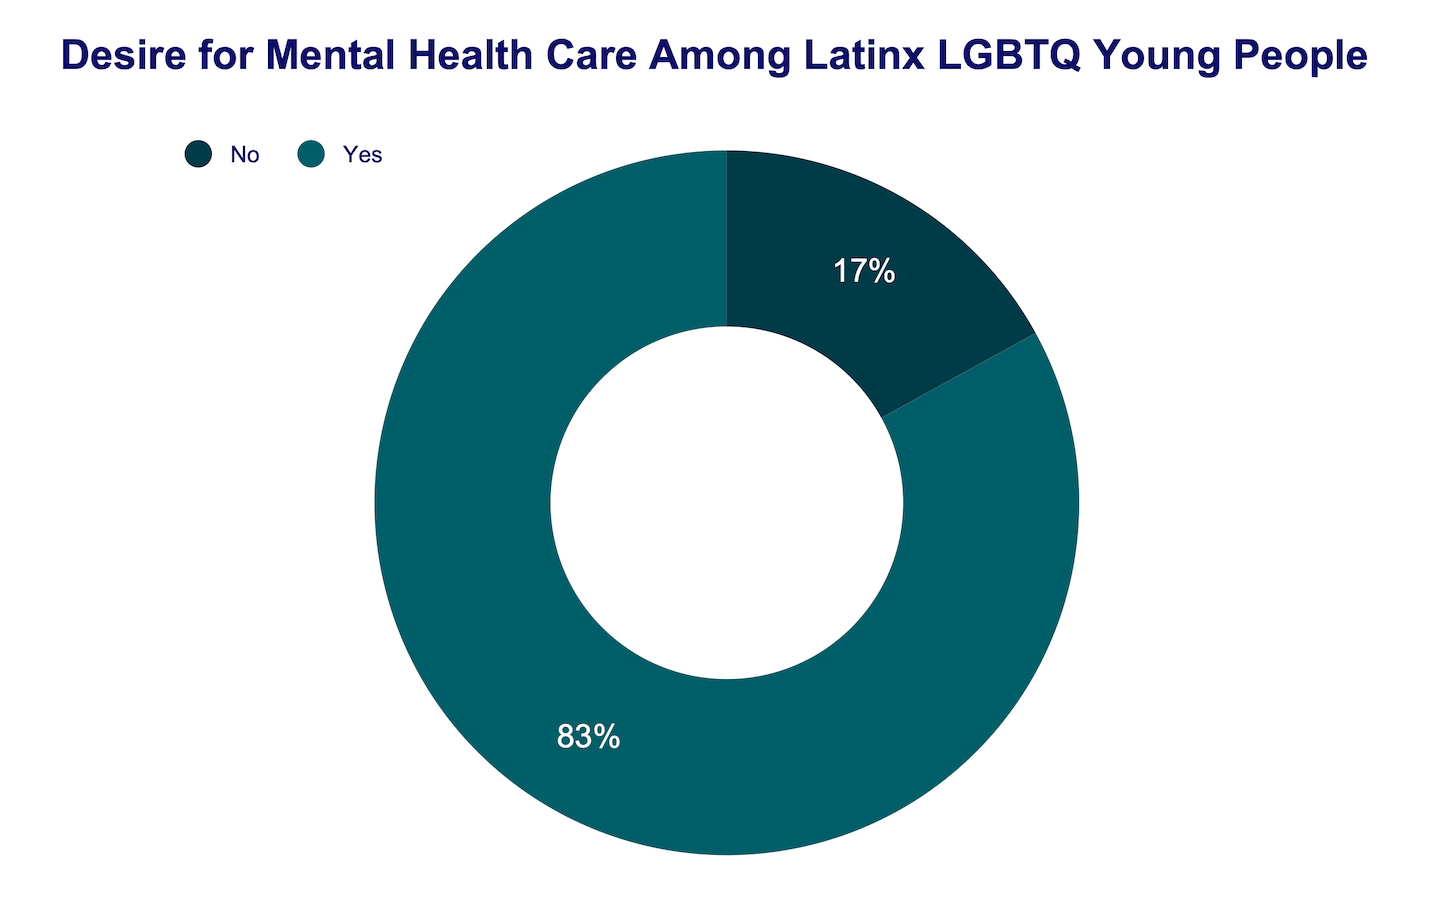 Desire for mental health care among Latinx LGBTQ young people donut graph